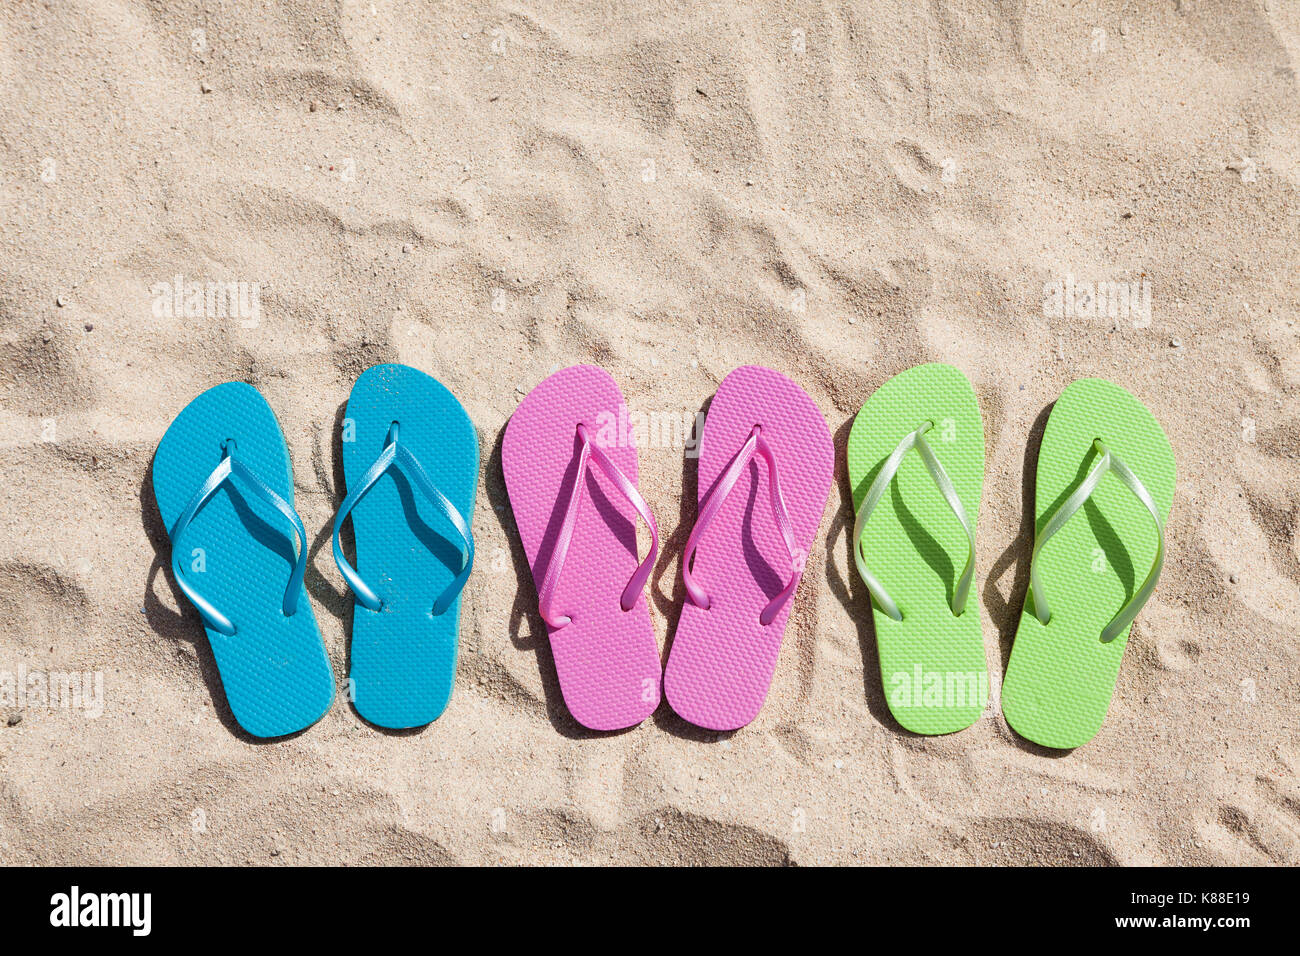 Three Pairs Of Flip-flops In A Row On Beach Stock Photo